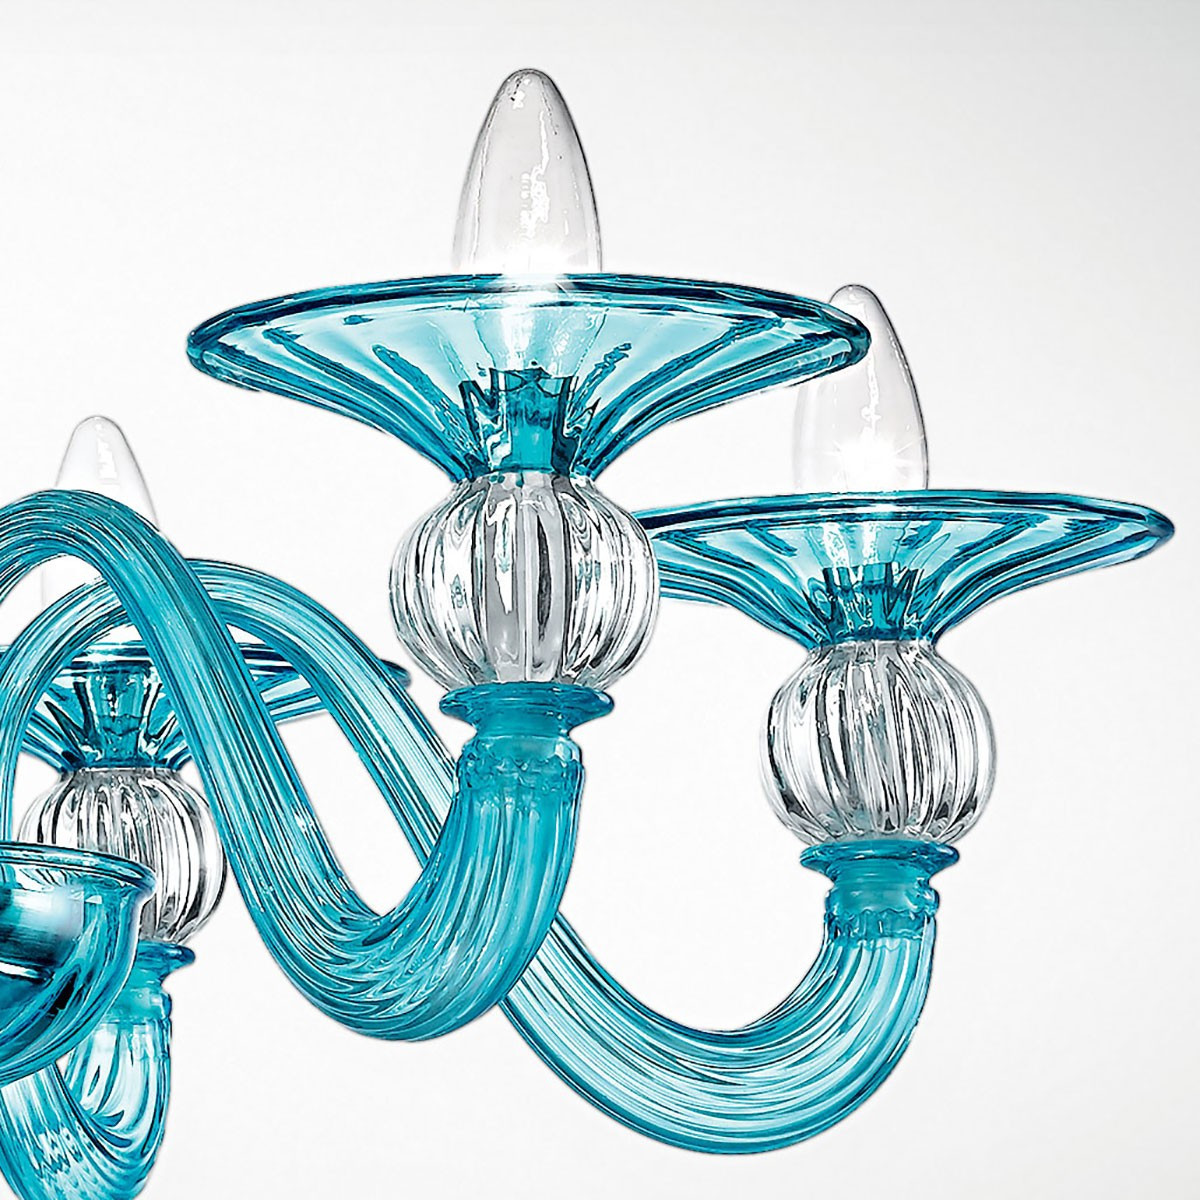 Ermione Murano Glass Chandelier, Turquoise Murano Glass Chandelier